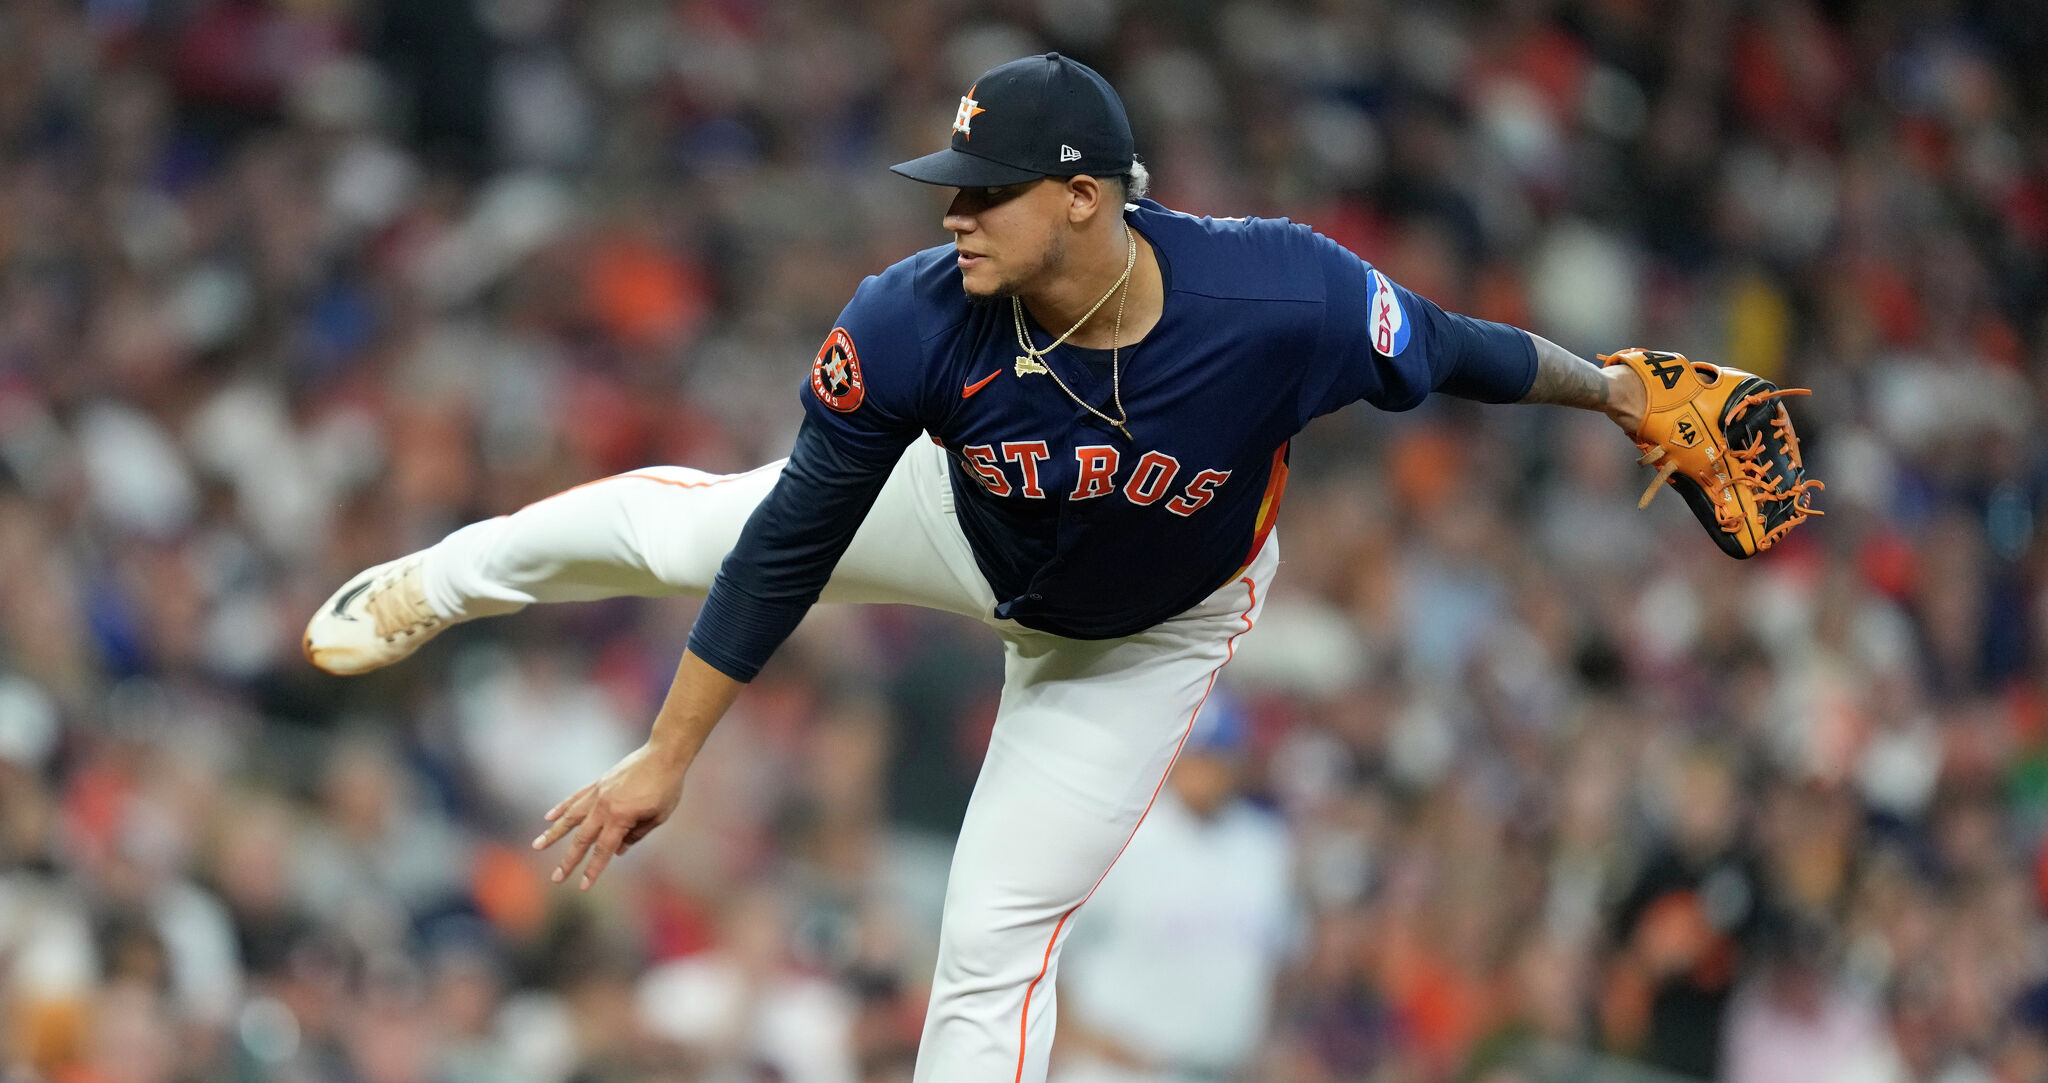 Astros' Bryan Abreu Suspended 2 Games, Fined for Throwing at